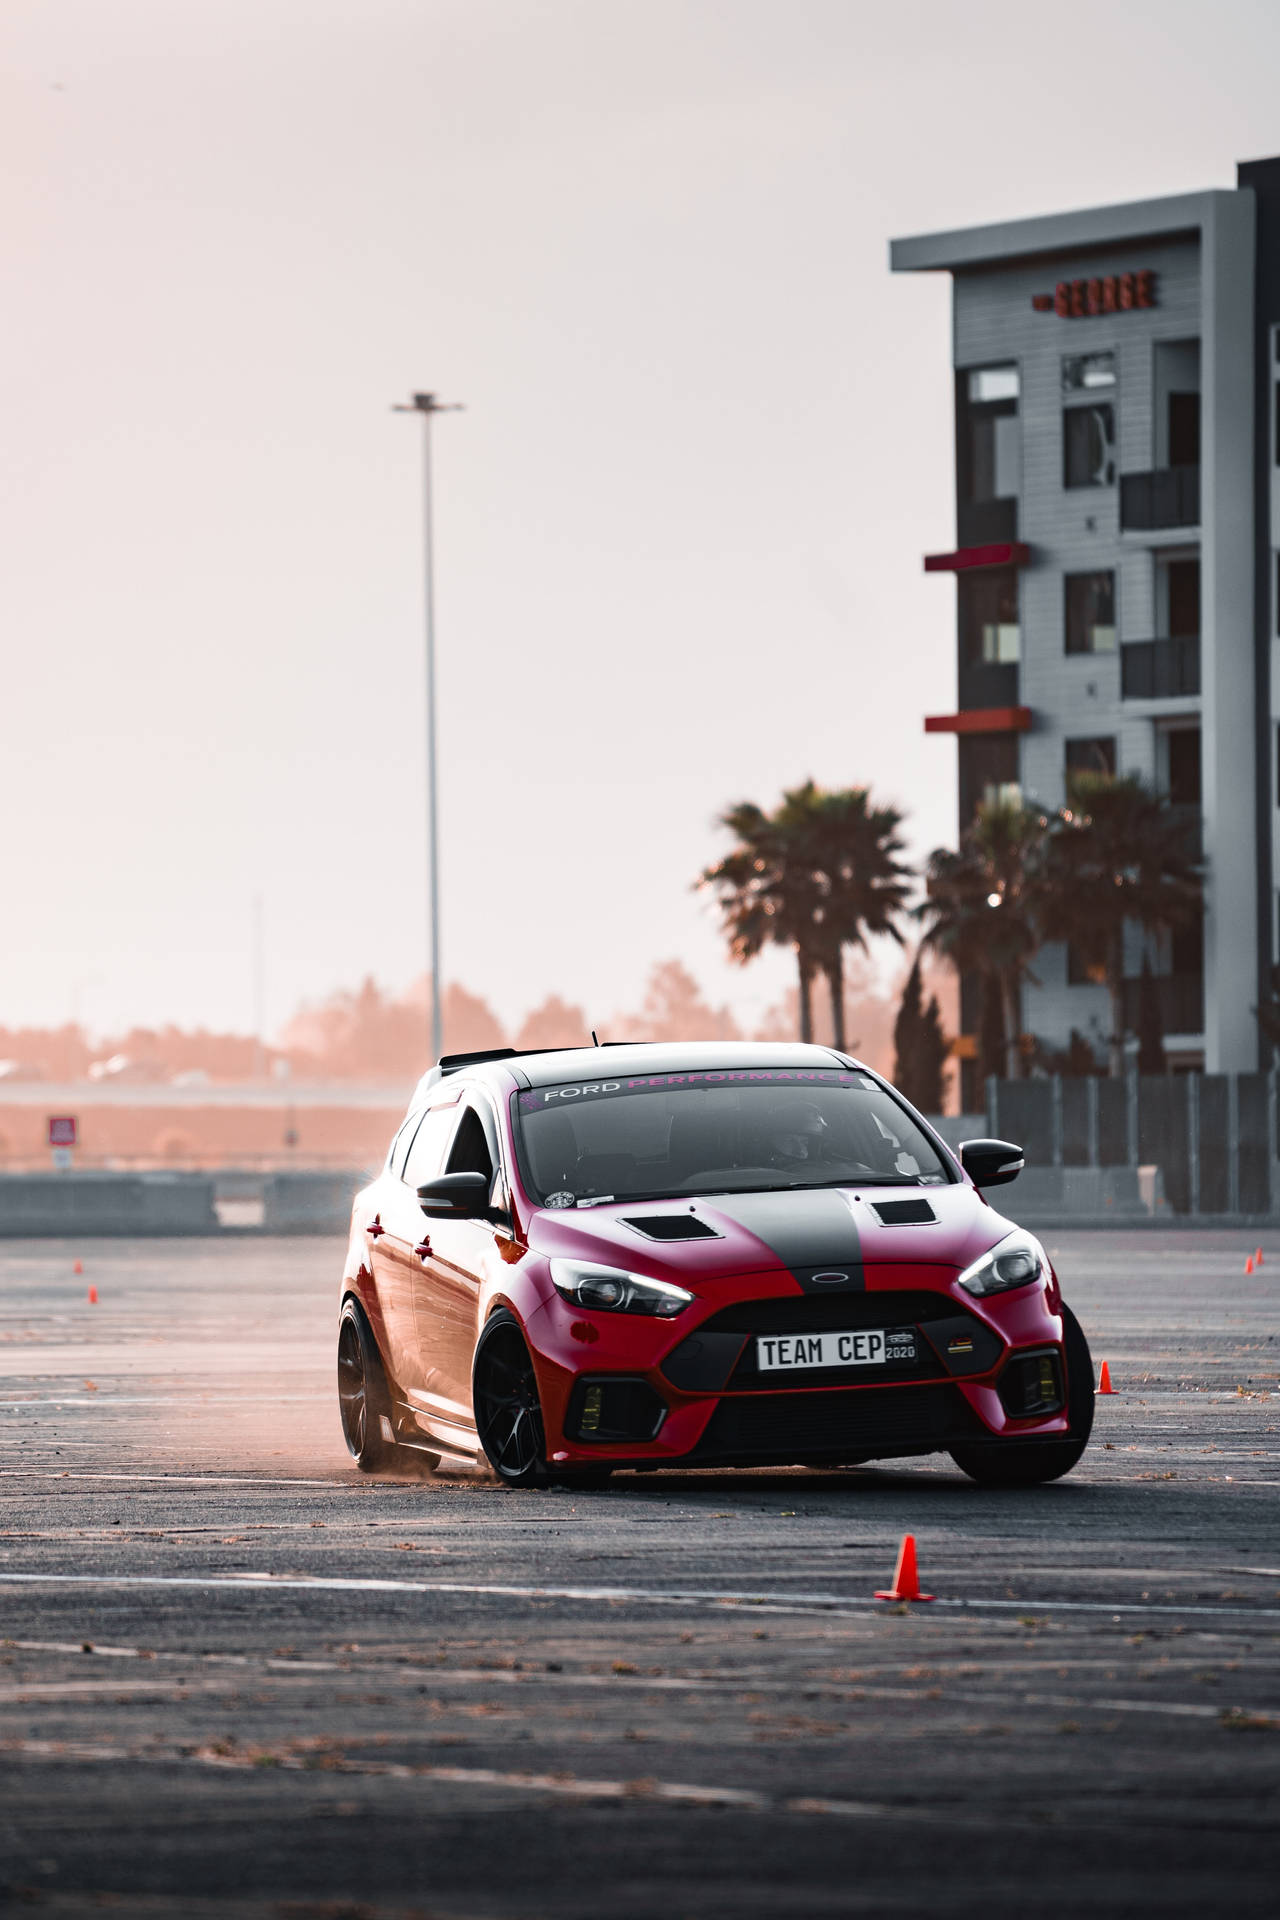 Red Car Drifting In Action Wallpaper